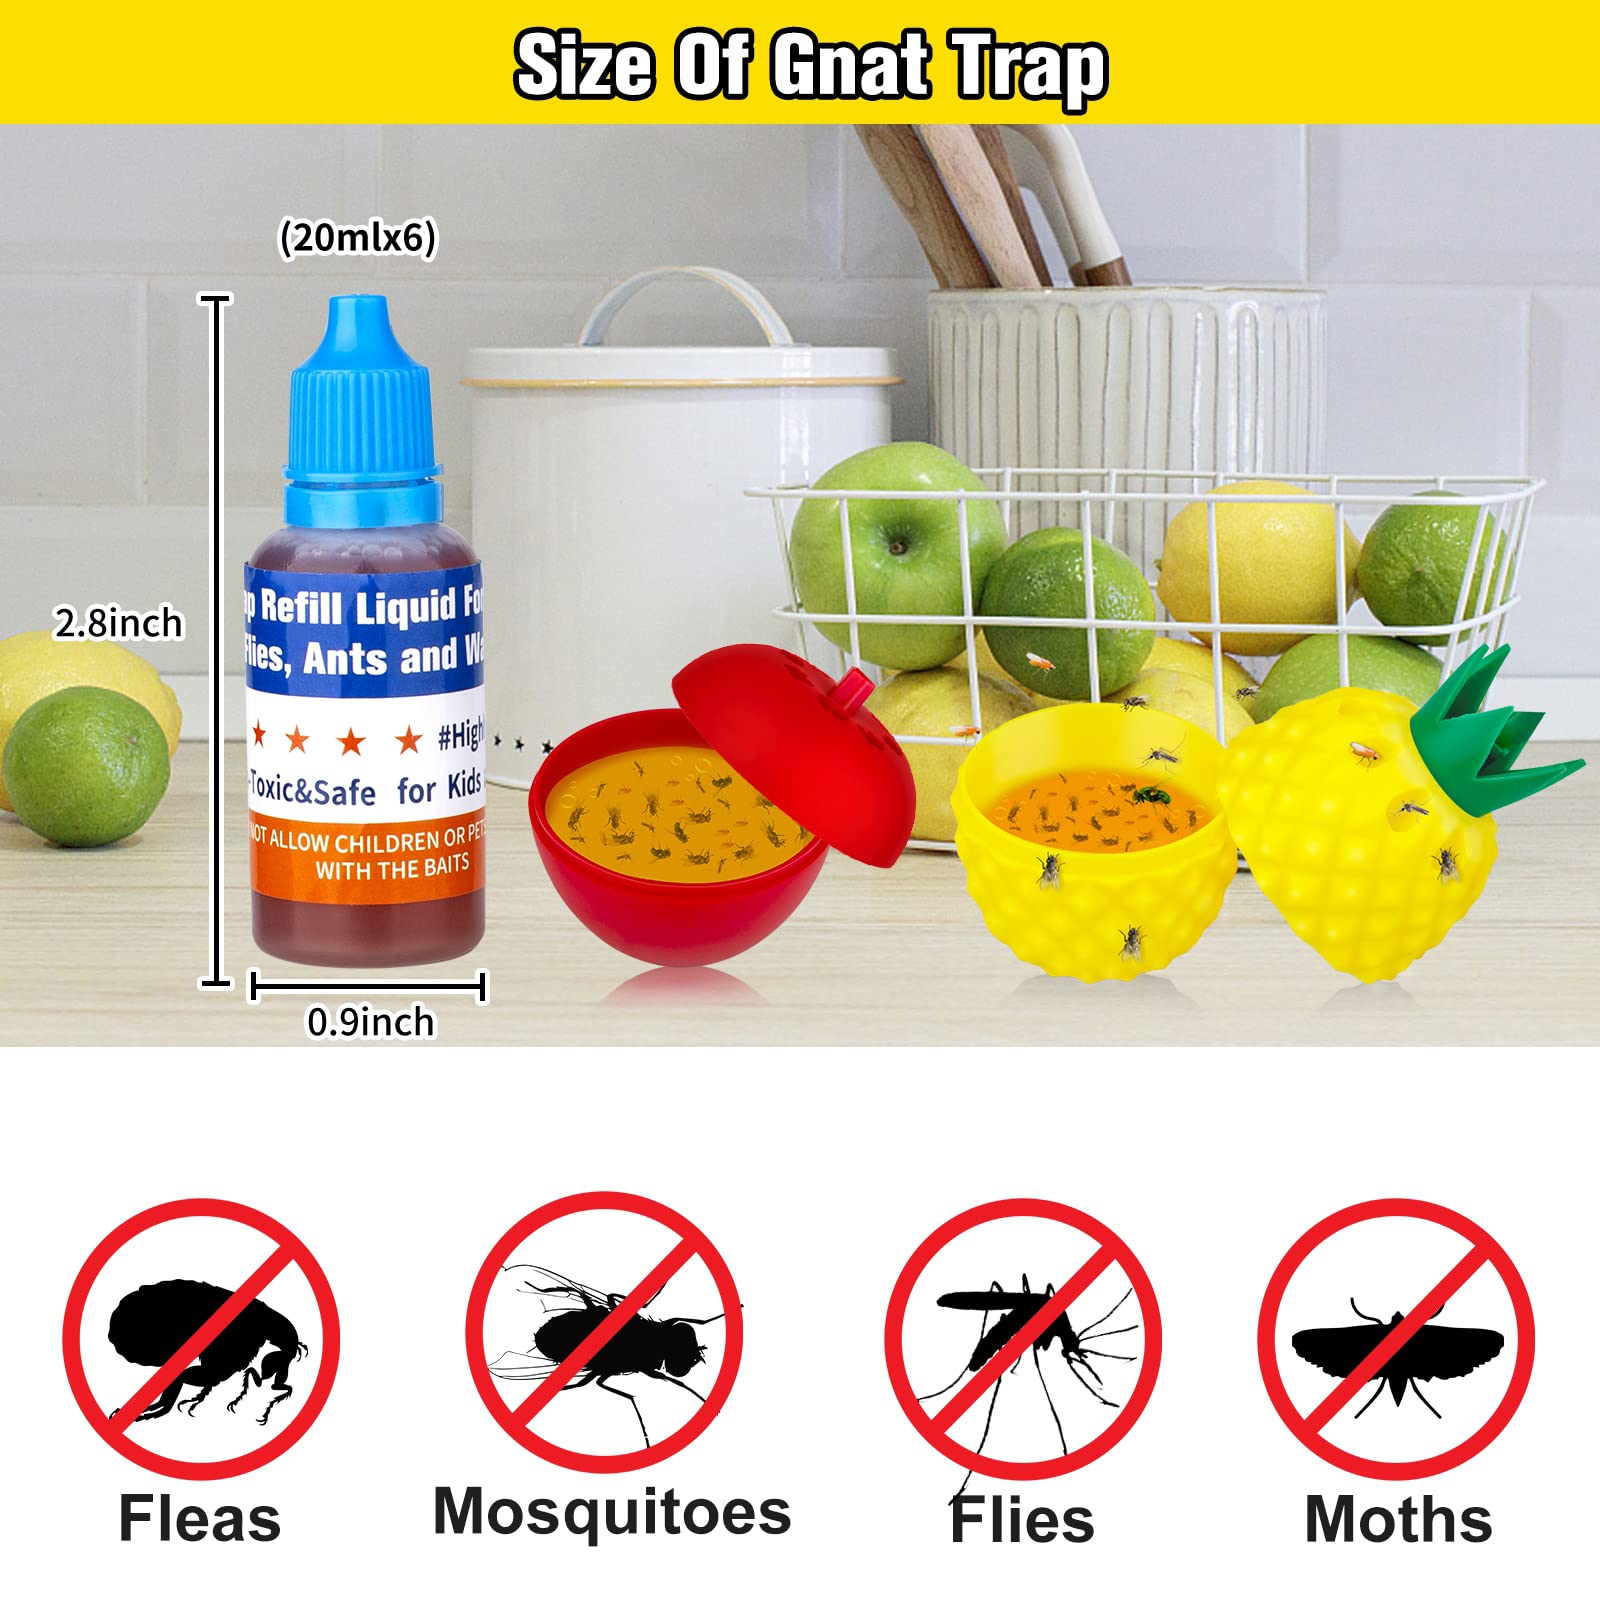 Protecker Fruit Fly Trap Refill Liquid Only,2023 Fruit Fly Traps for Indoors,Fruit Fly Killer for Home,Kitchen,Ready-to-Use Fly Trap Refill Liquid,Fruit Fly Trap Bait Refill for Indoors(4 Pack)